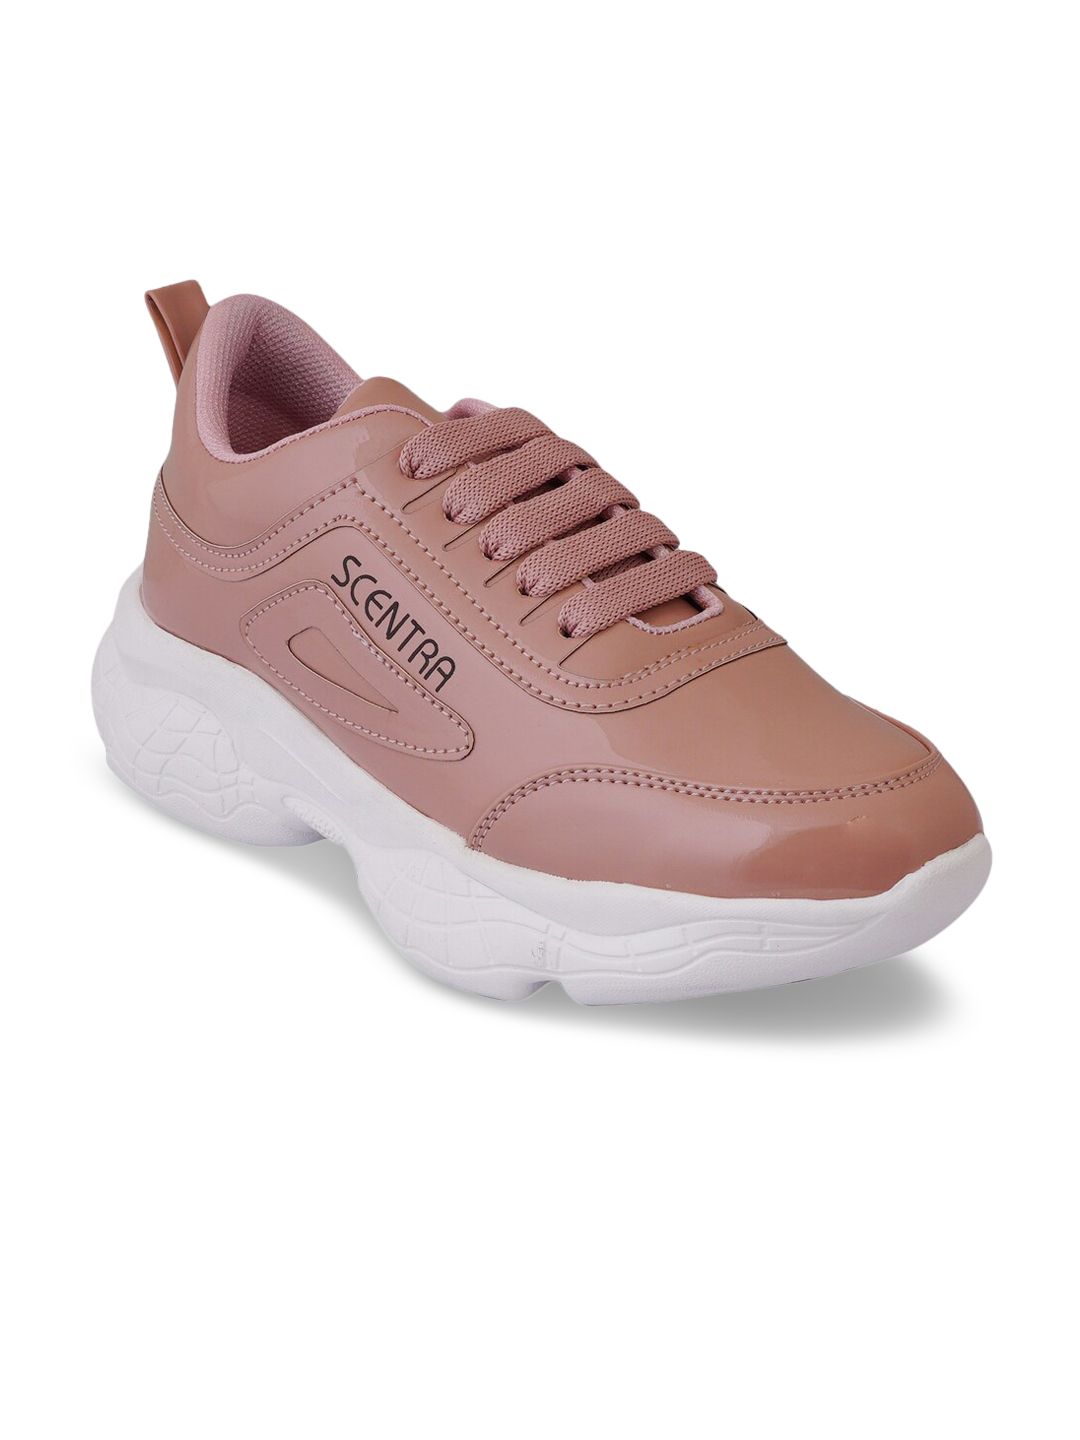 SCENTRA Women Nude-Coloured Running Shoes Price in India